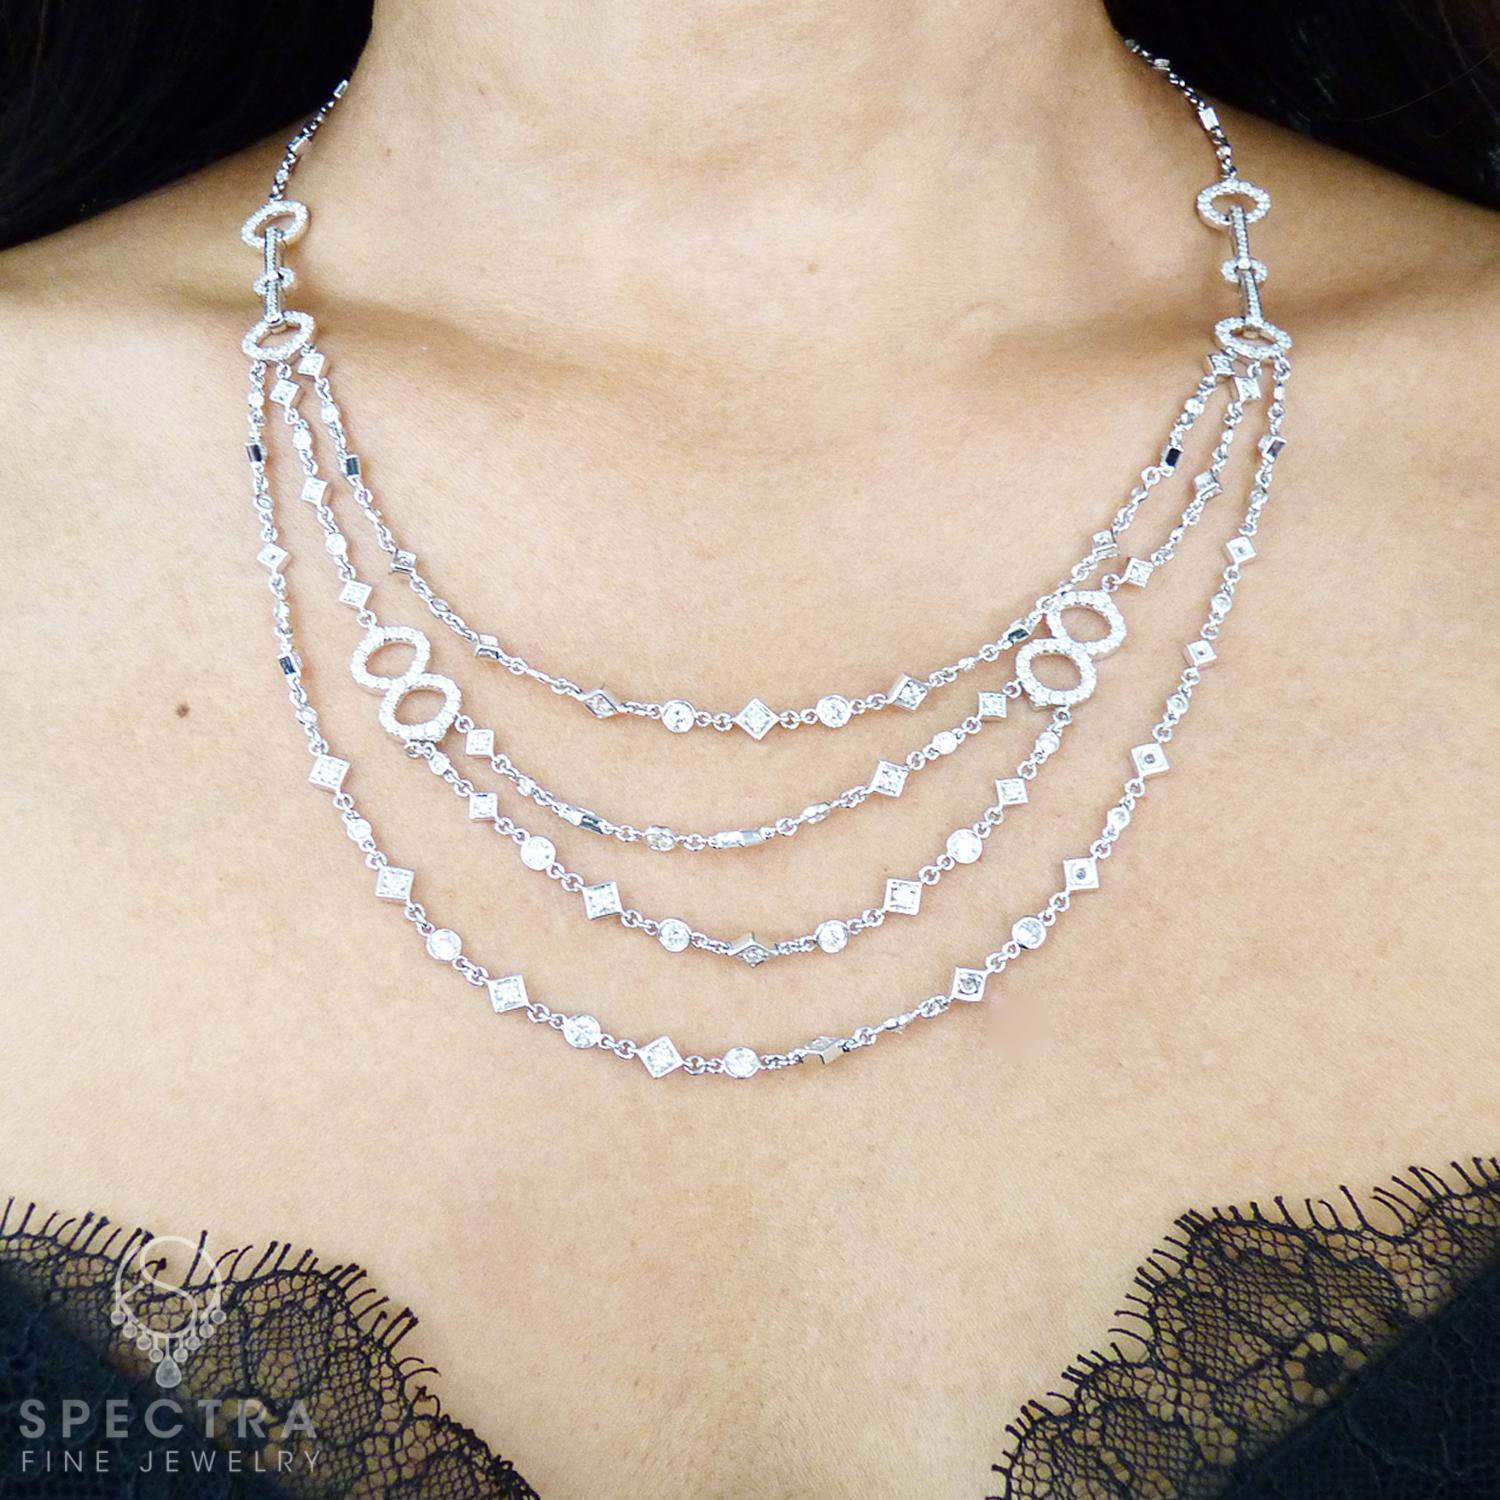 Diamond Multi-Strand Gold Necklace
A beautiful drop necklace comprising of a chain suspending four rows and embellished with round diamonds 
weighing 6.50 carats total.
The necklace is made of 18k white gold, measures 18 ins in length (45.7 cm).
The